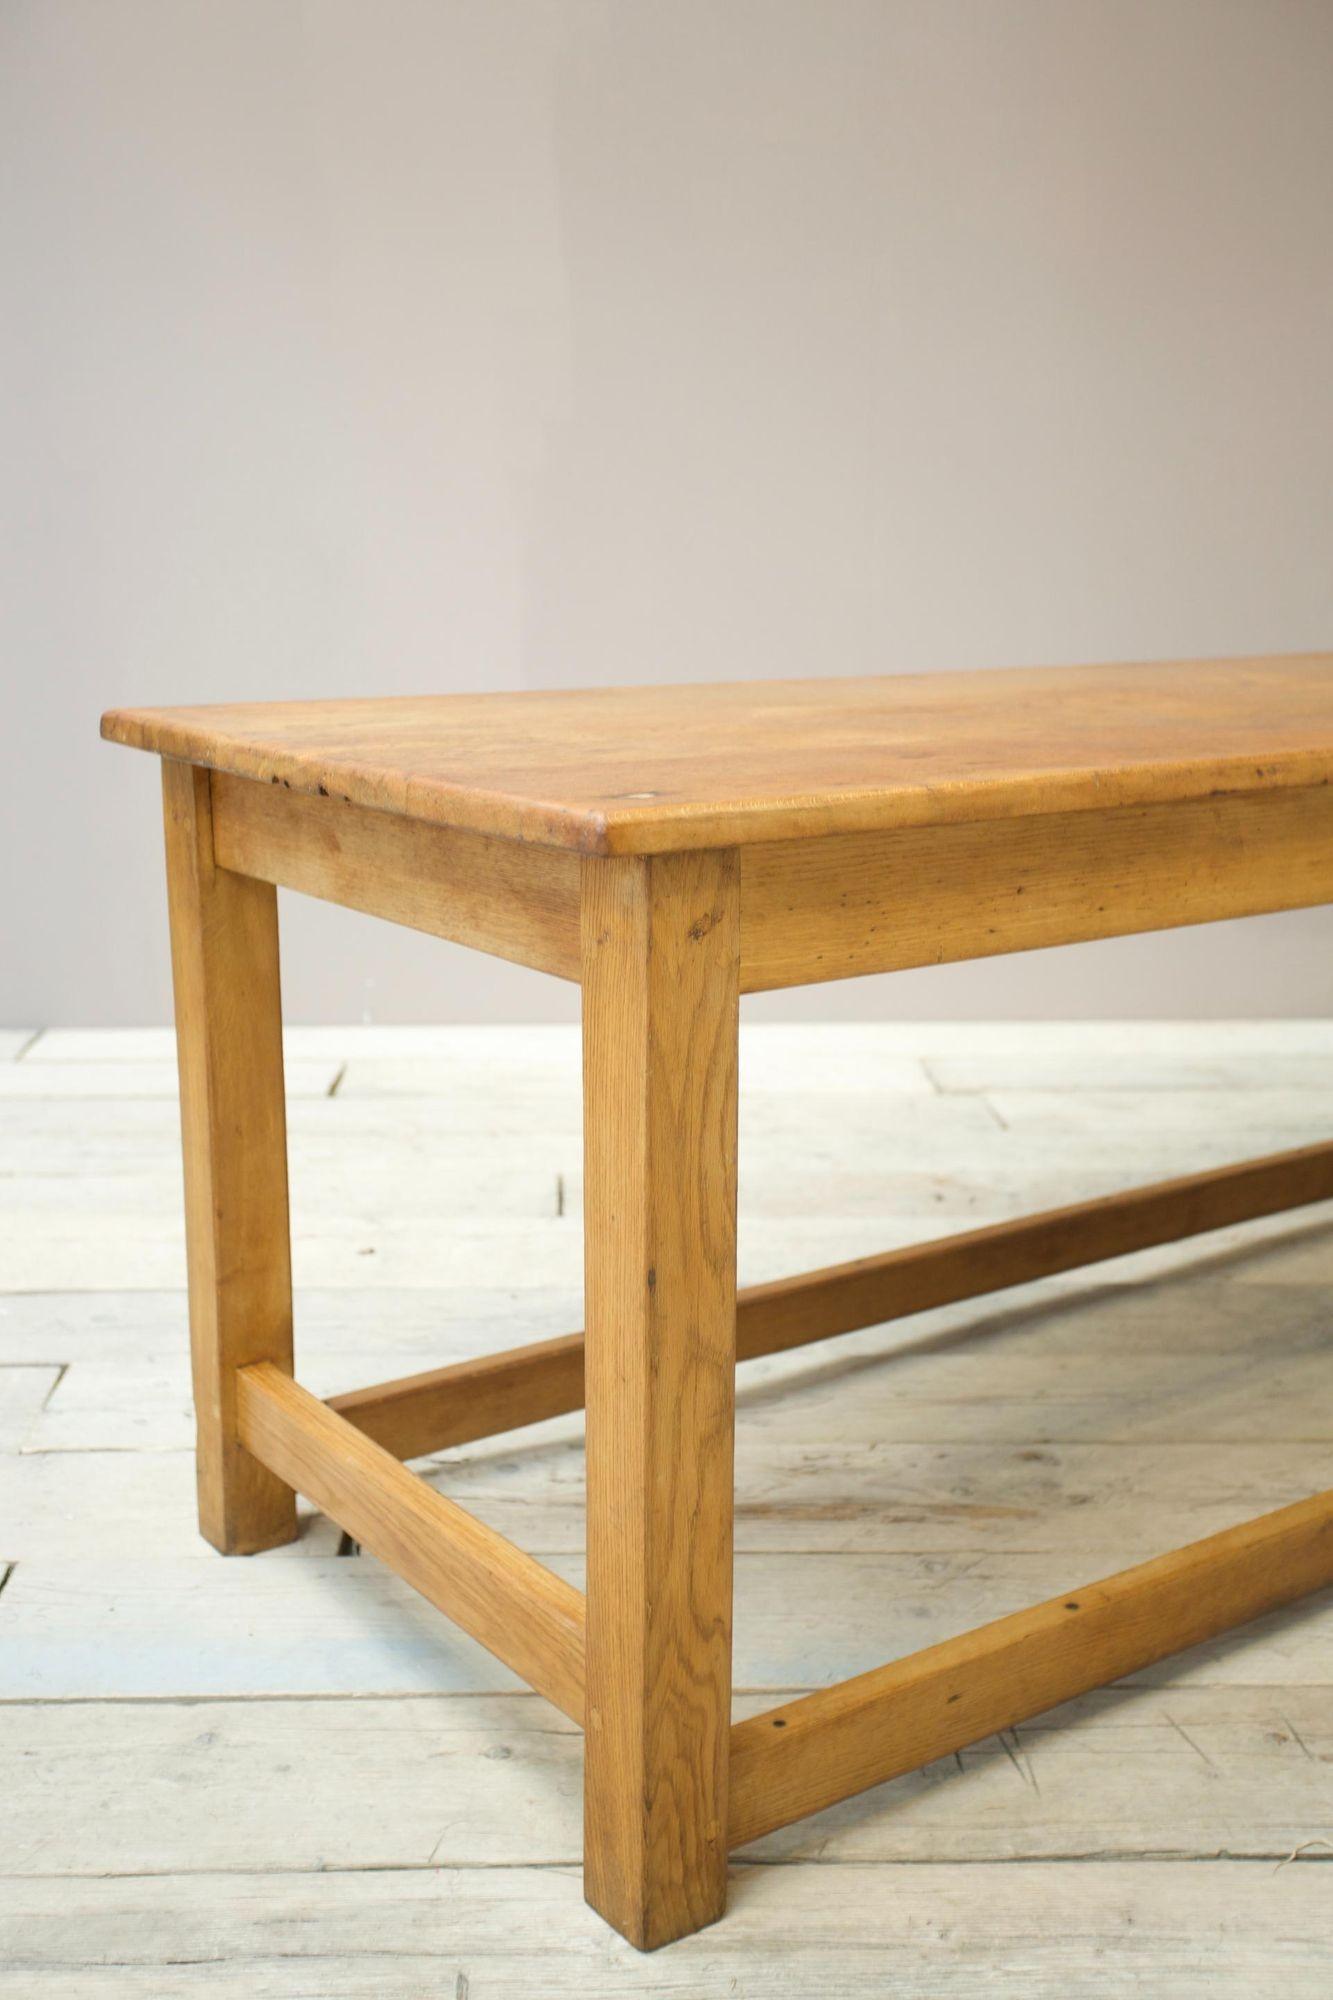 This is a great looking 19th century solid oak refectory table from a farmhouse in Cheshire. Originally thought to be used in a bakers as there is evidence of a slated lower shelf which has since been removed. It makes an ideal kitchen prep table or